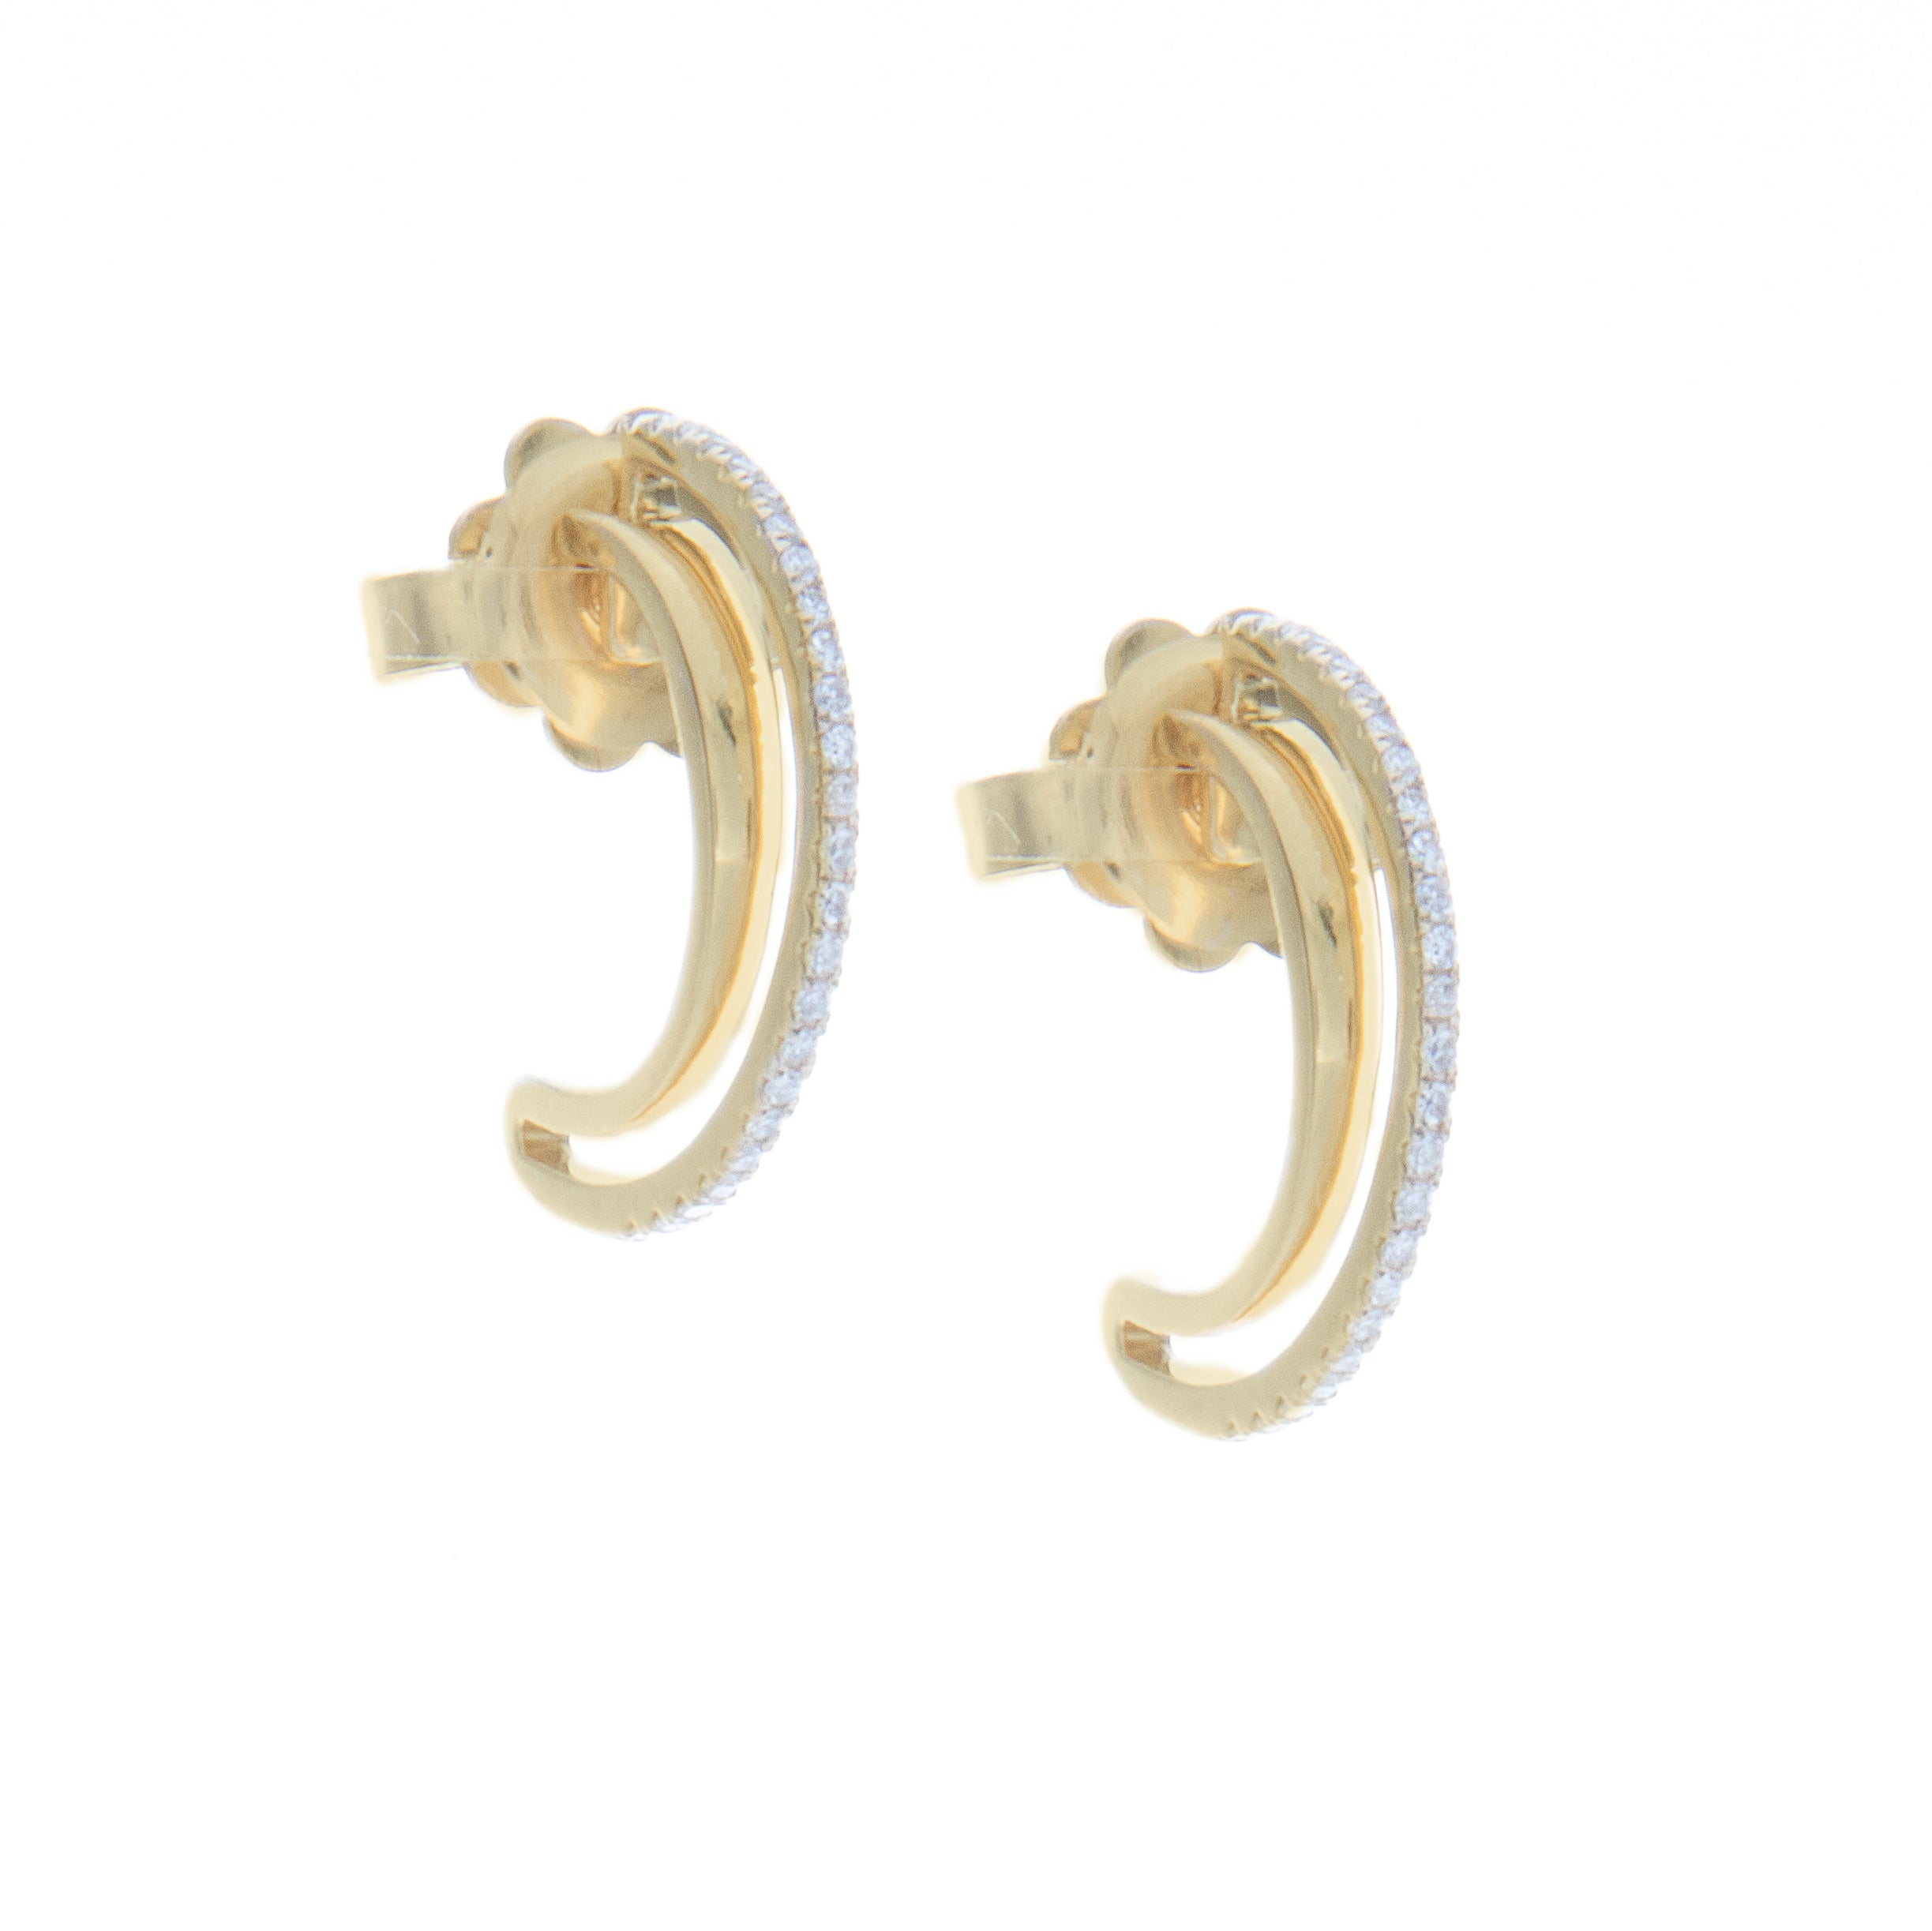 Latest Peacock Design Gold Stud Earrings Collection ER2651